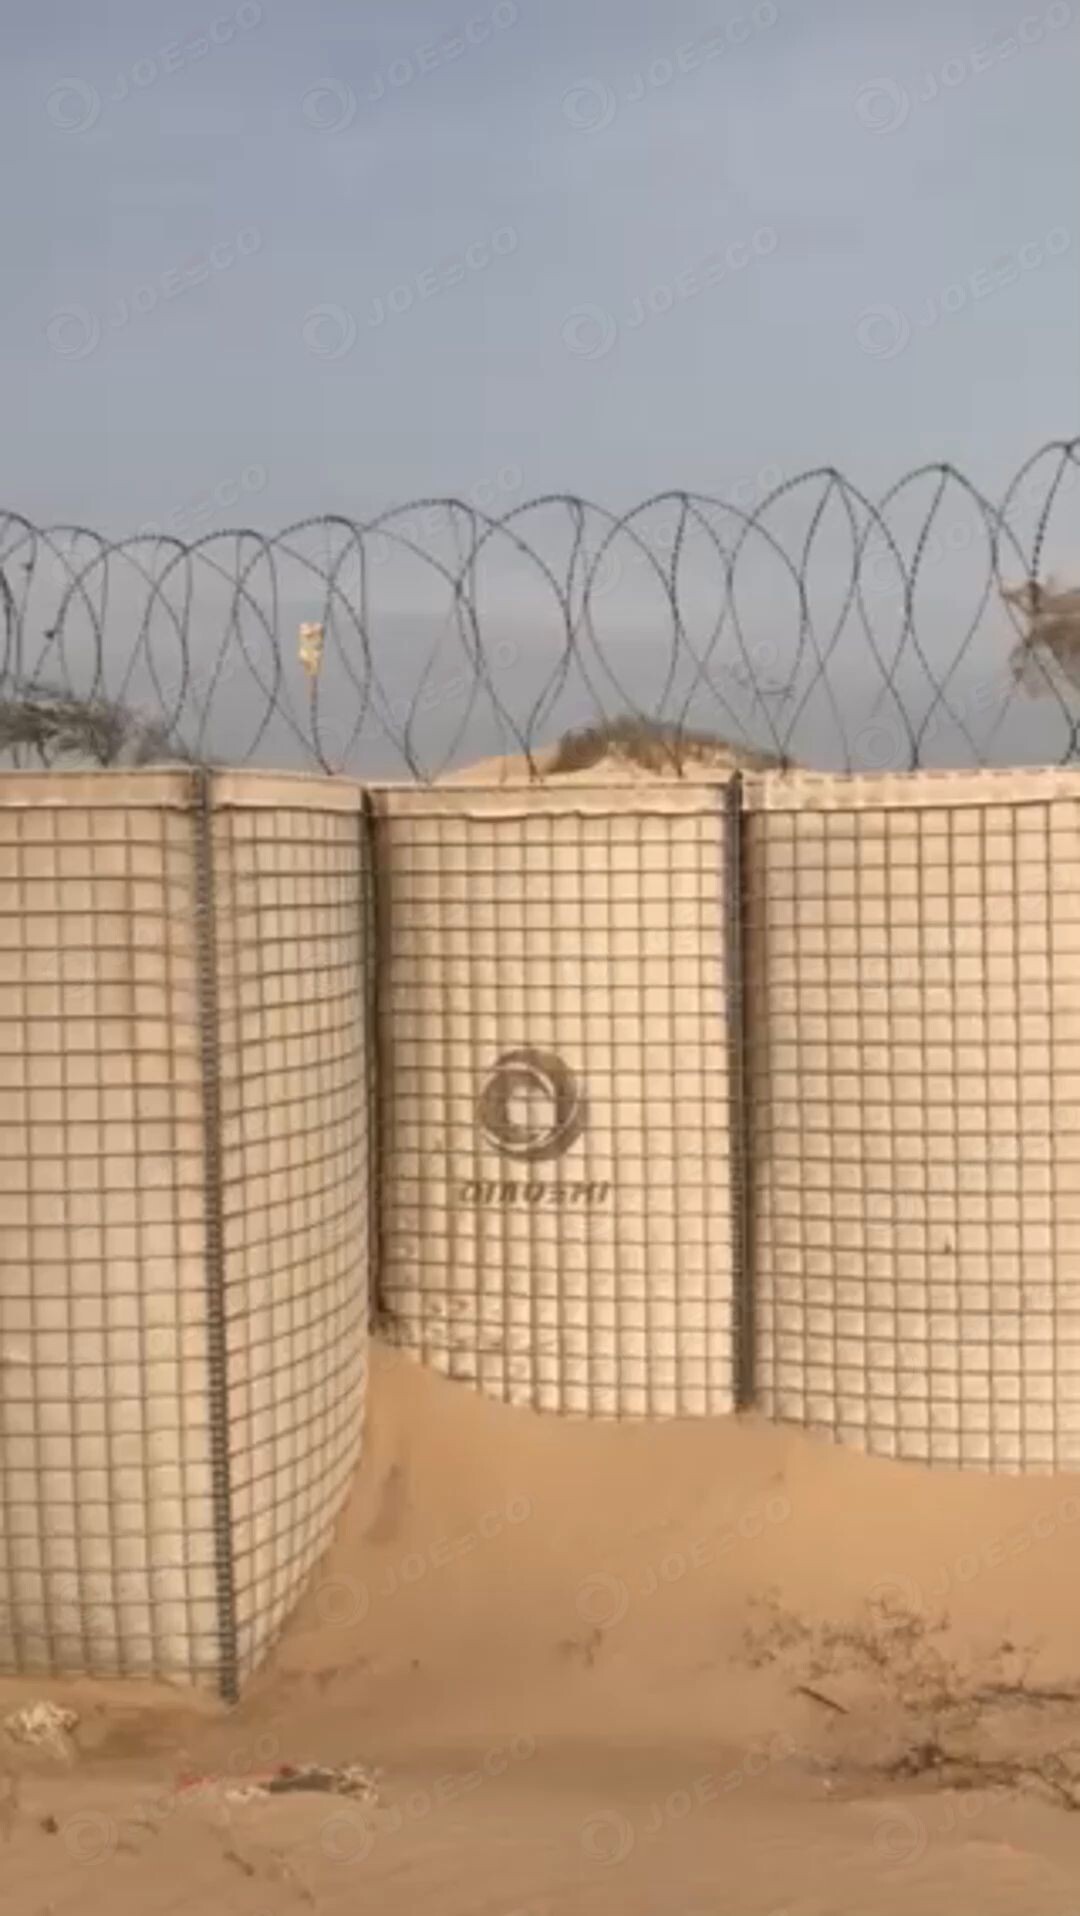 In the Gulf of Aden, the JOESCO military barriers stand tall in the wind. thumbnail 1